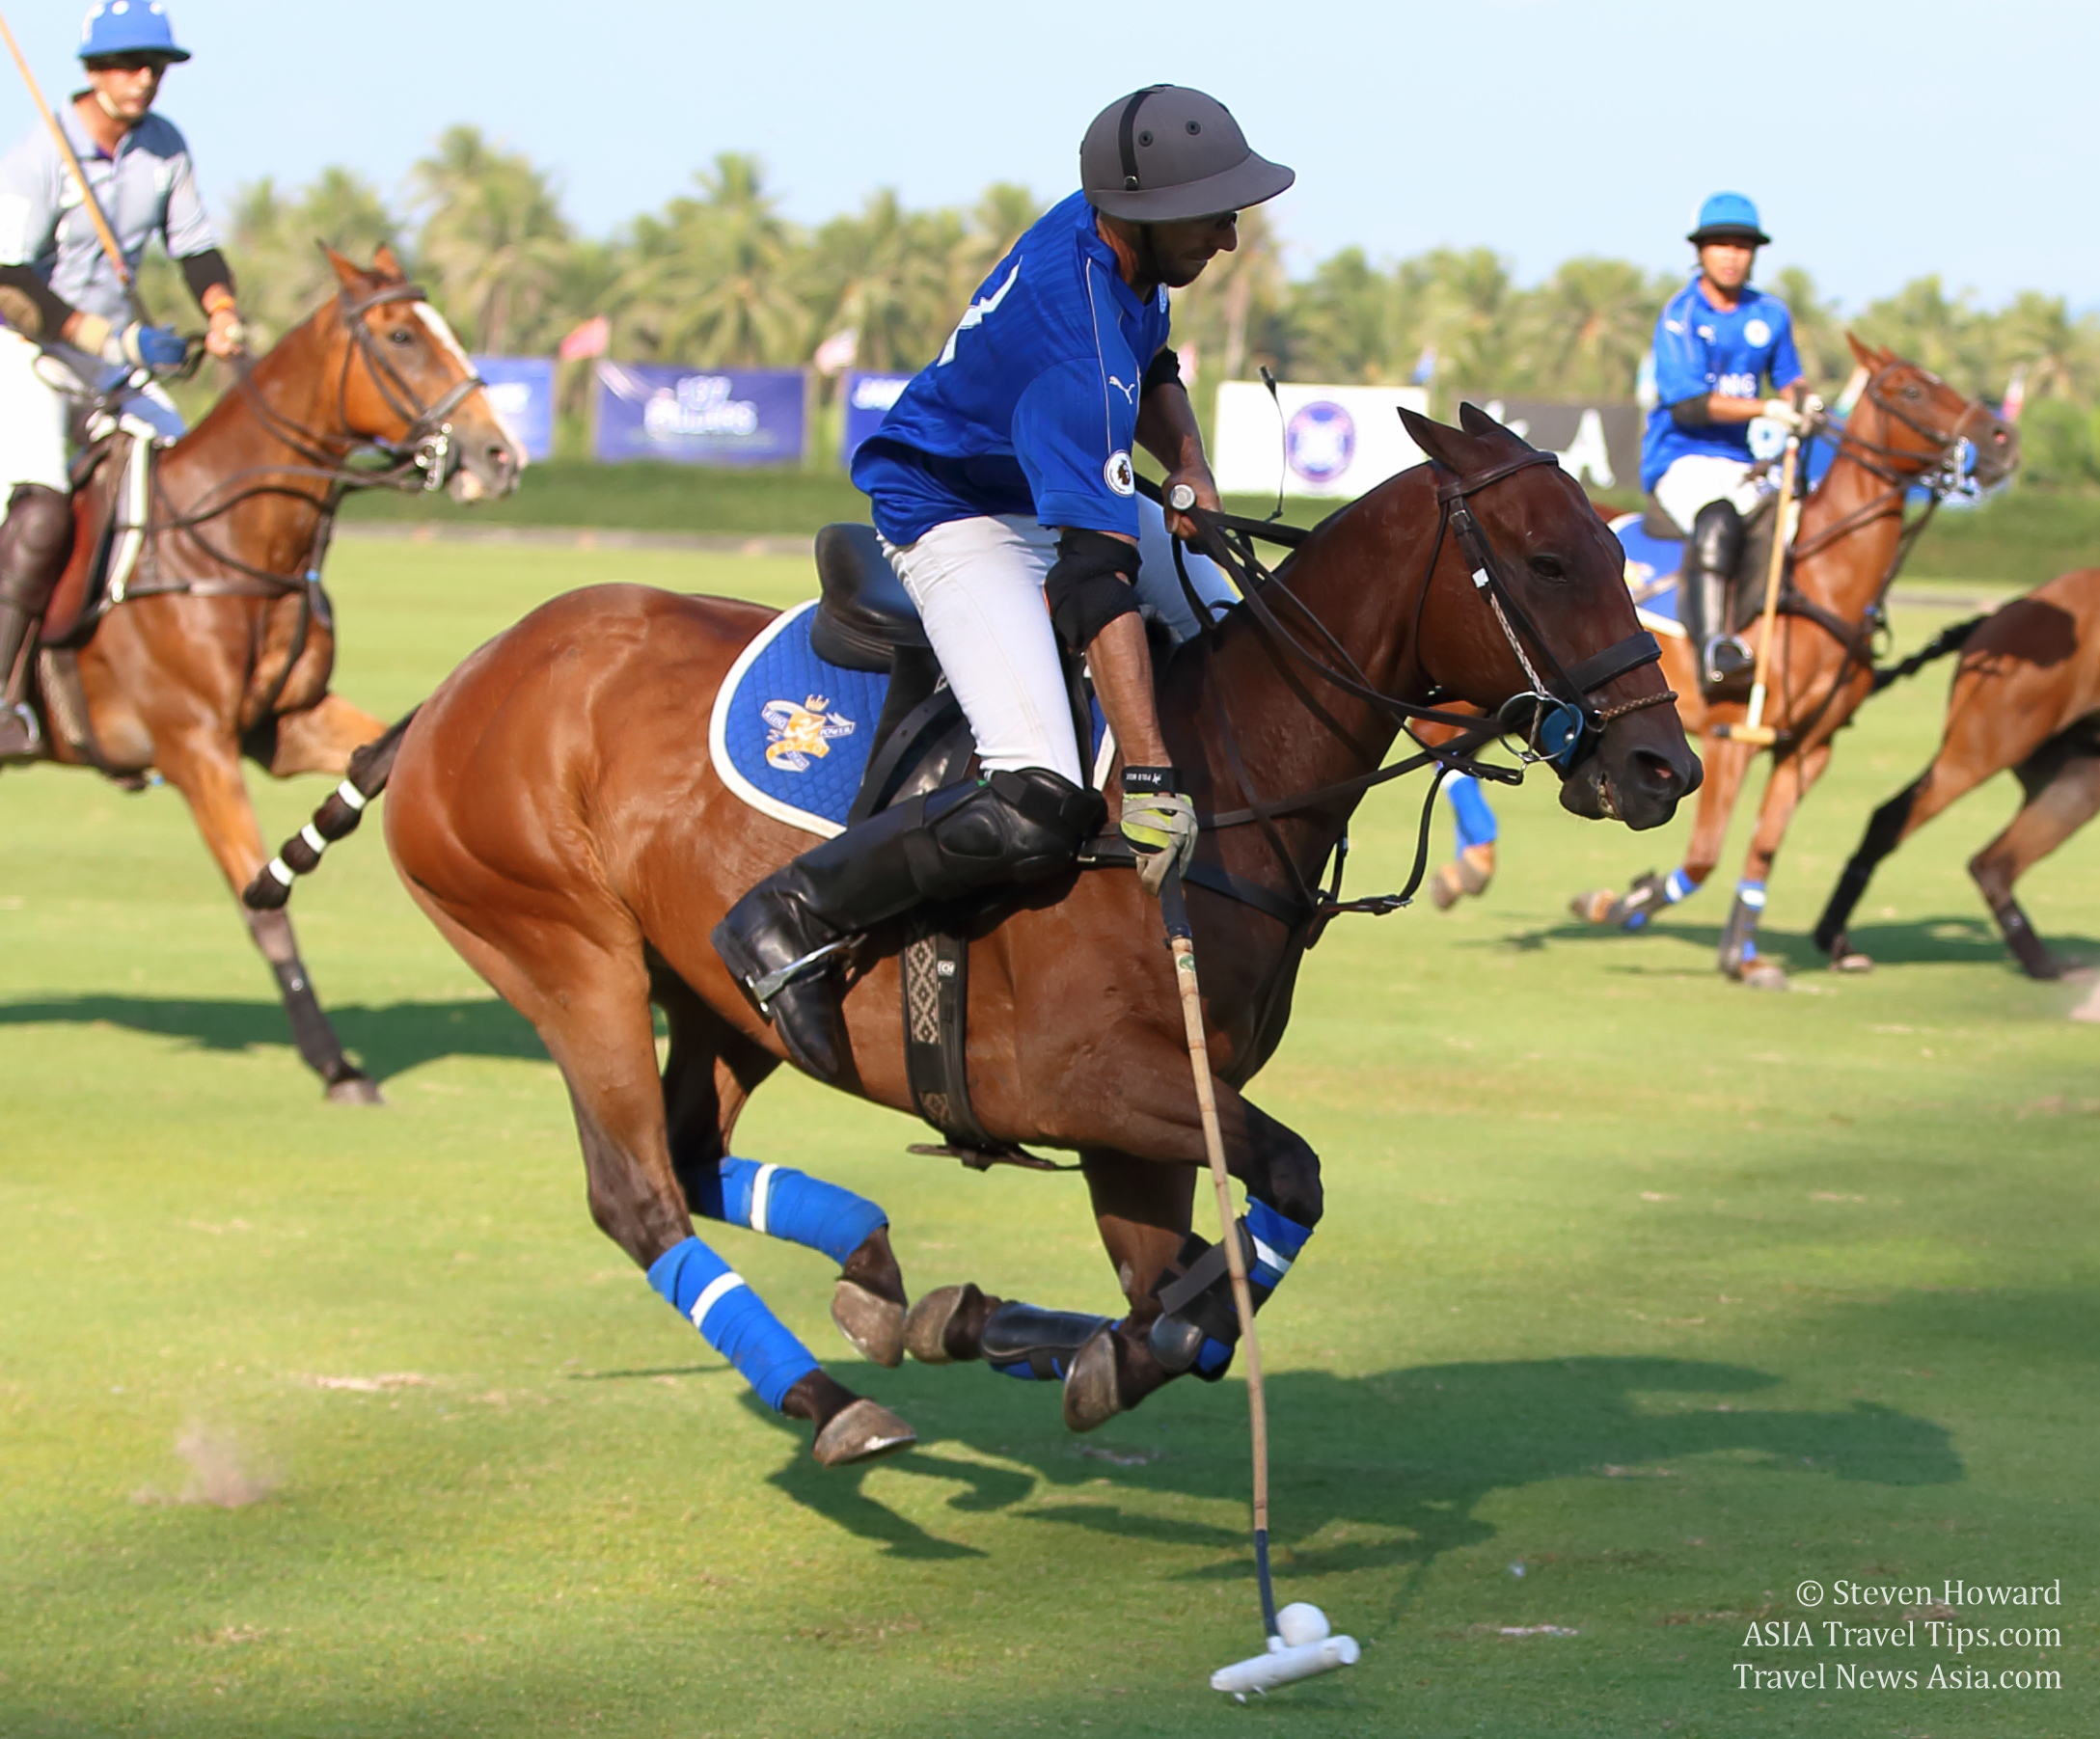 Pictures from 137 Pillars Polo Puissance Cup and James Ashton Trophy 2018 at Polo Escape in Pattaya, Thailand.